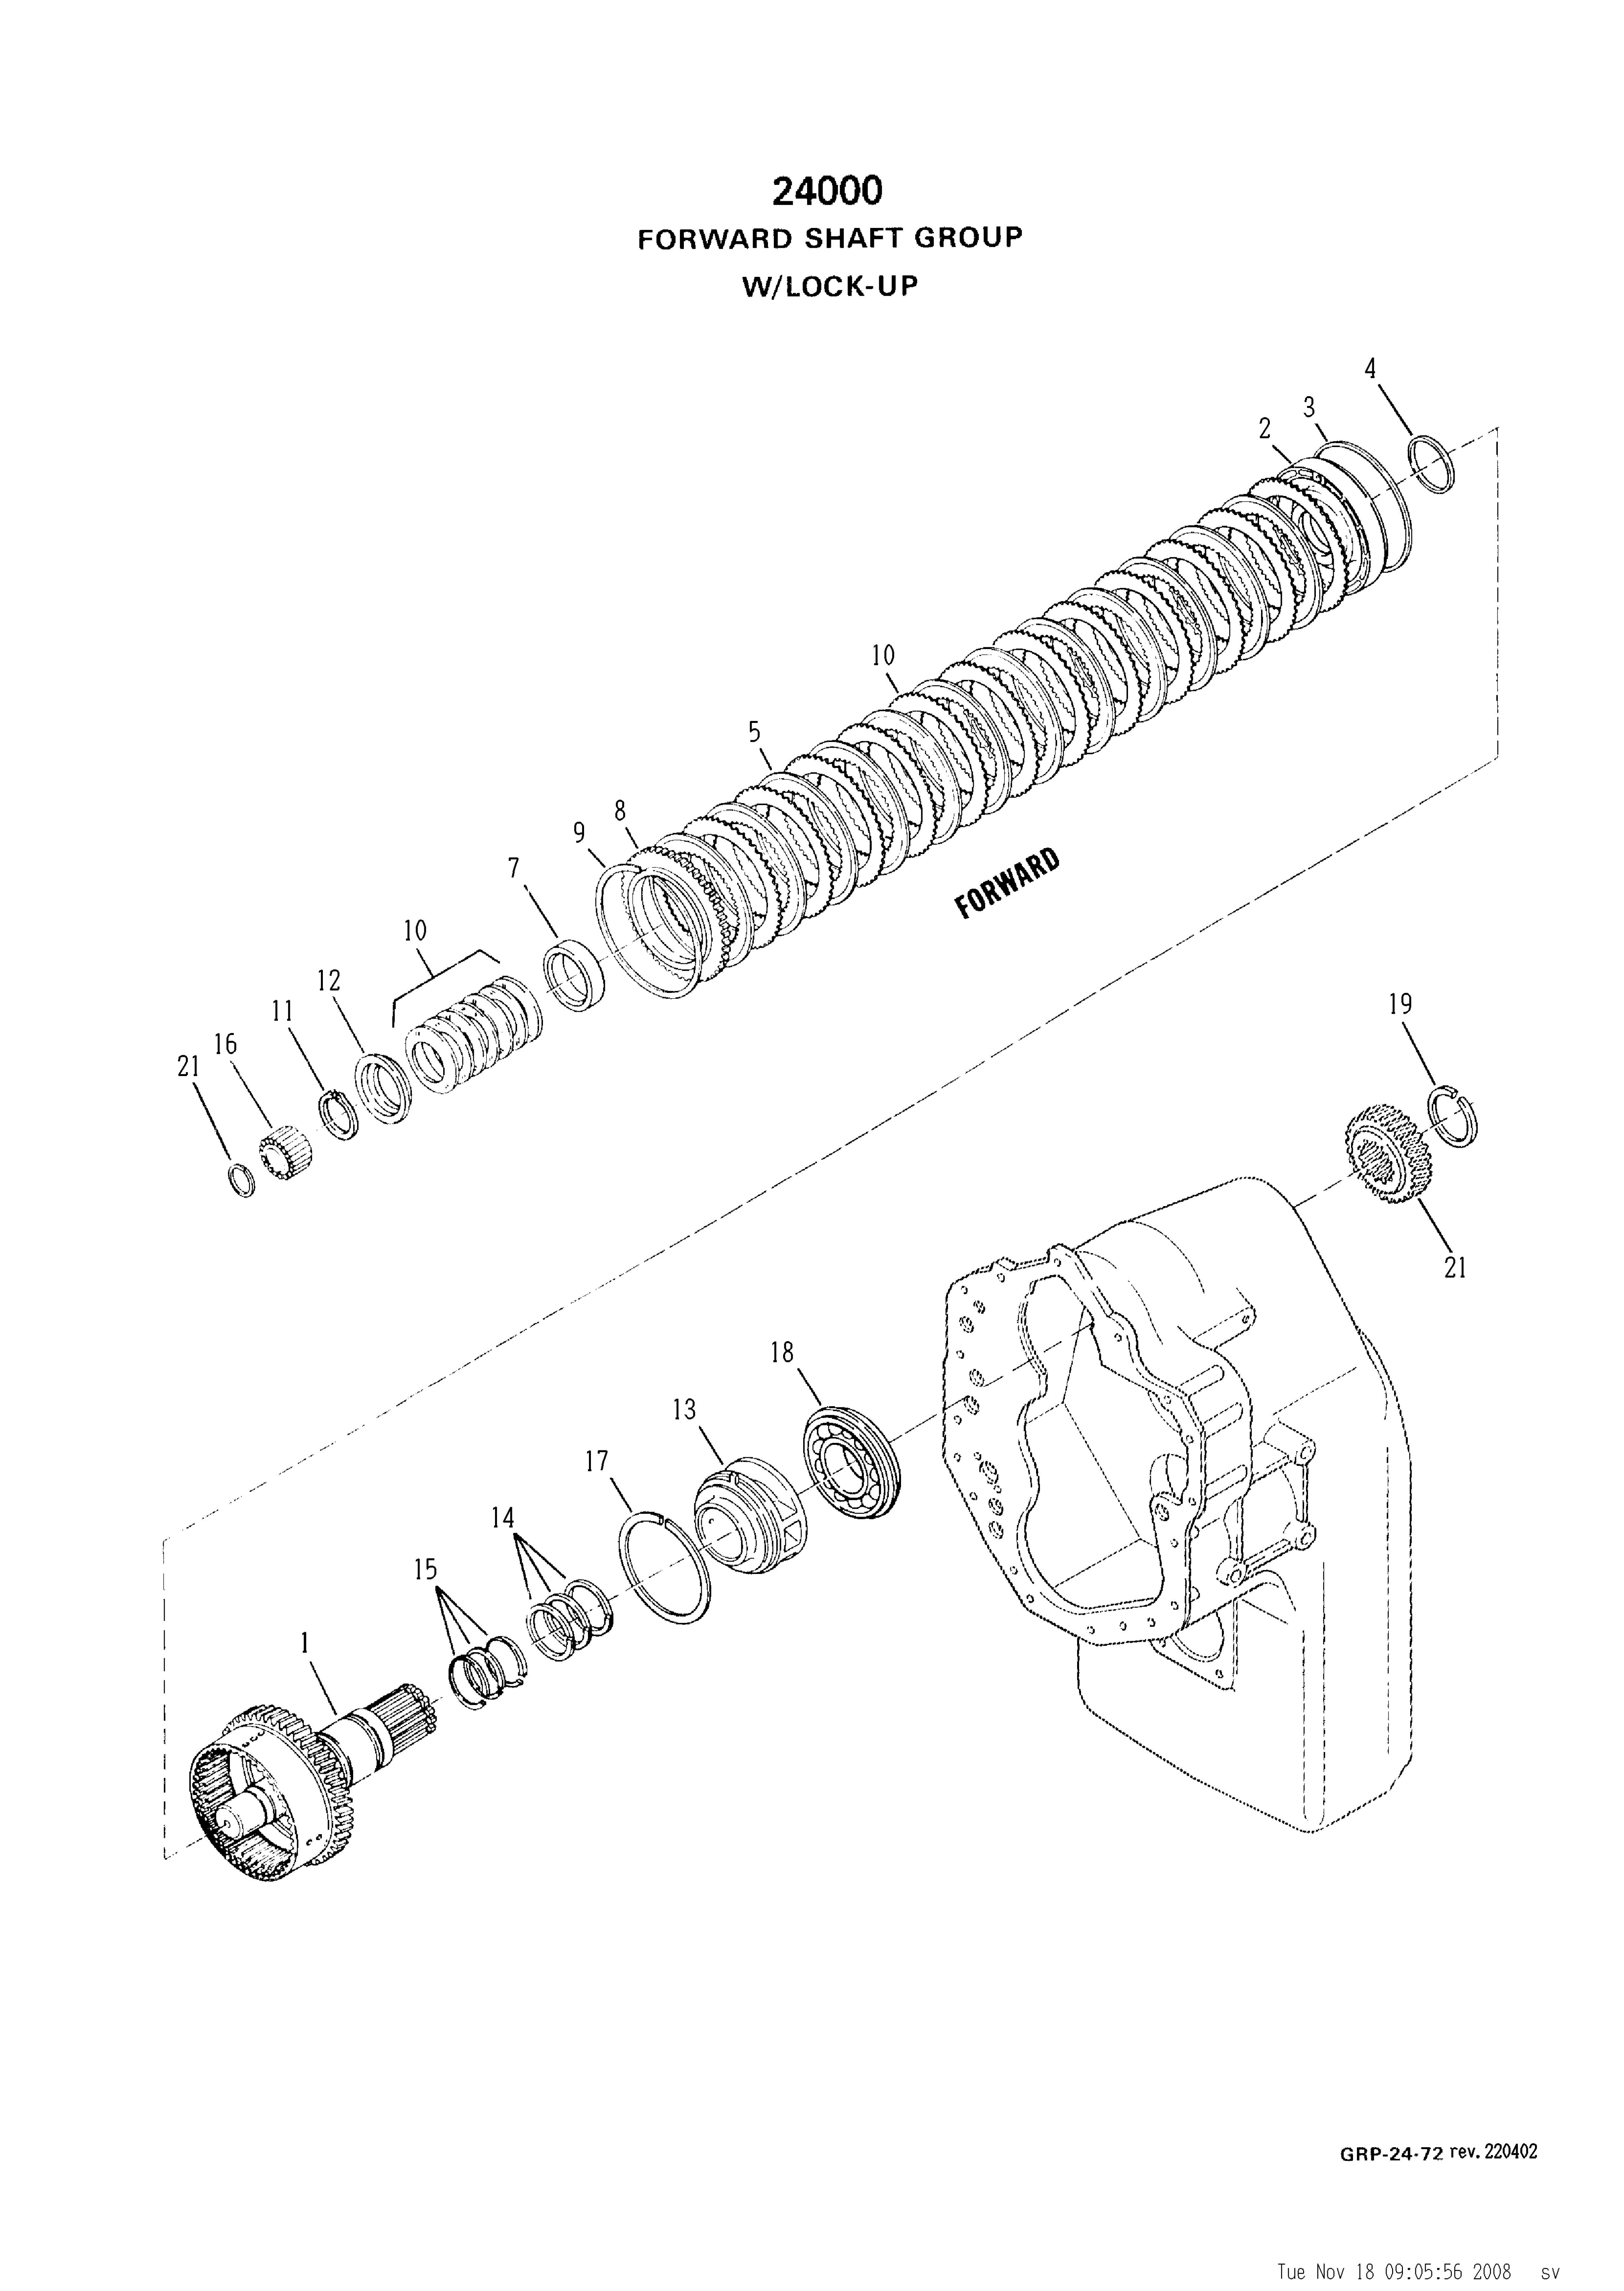 drawing for CNH NEW HOLLAND E114339 - BEARING (figure 4)